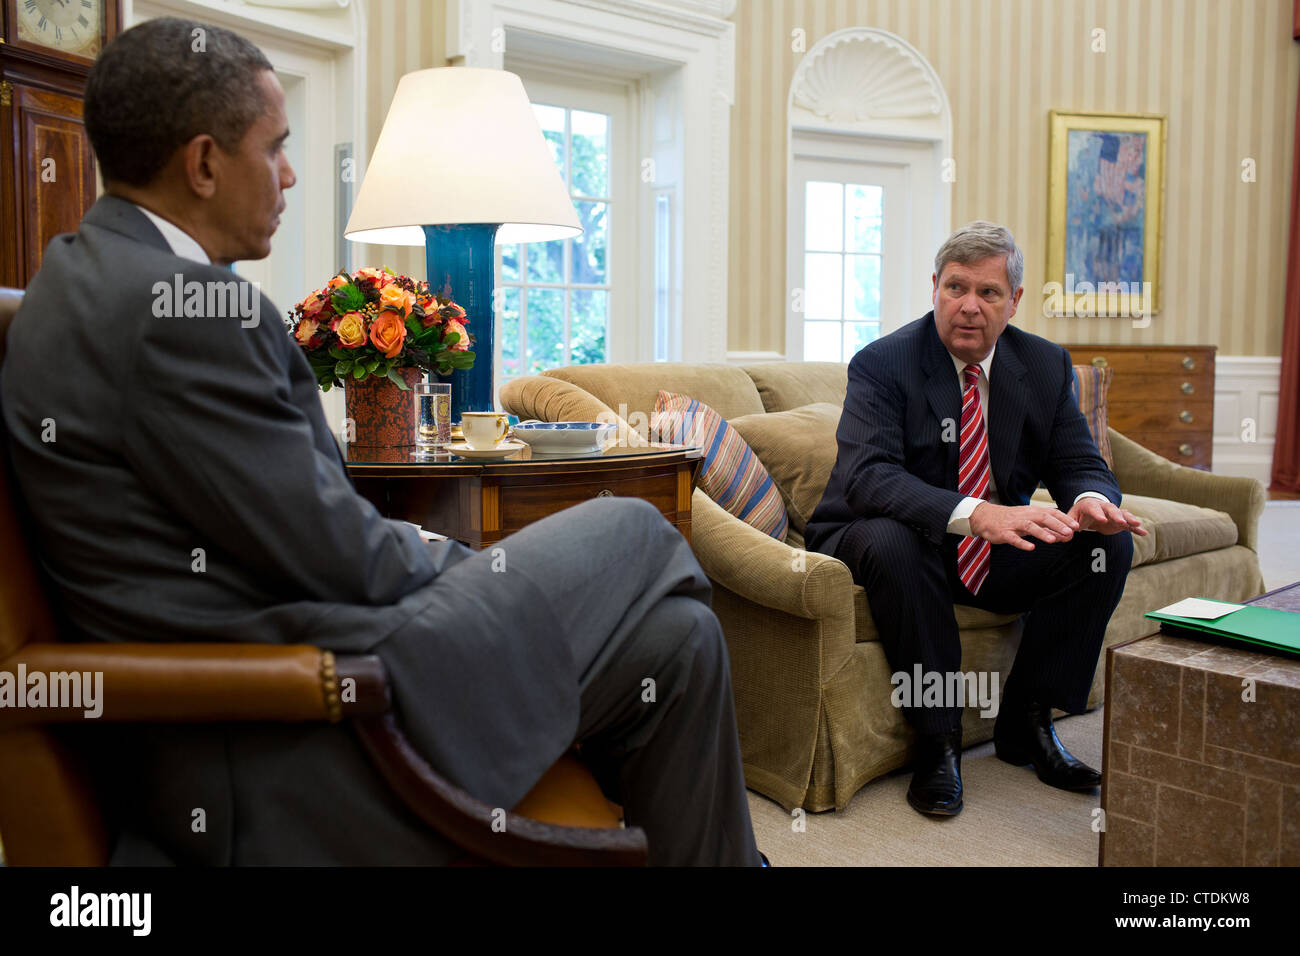 US President Barack Obama is briefed by Agriculture Secretary Tom Vilsack on the Administration’s efforts to respond to the historic drought conditions being felt across the country during a meeting in the Oval Office July 18, 2012 in Washington, DC. Stock Photo